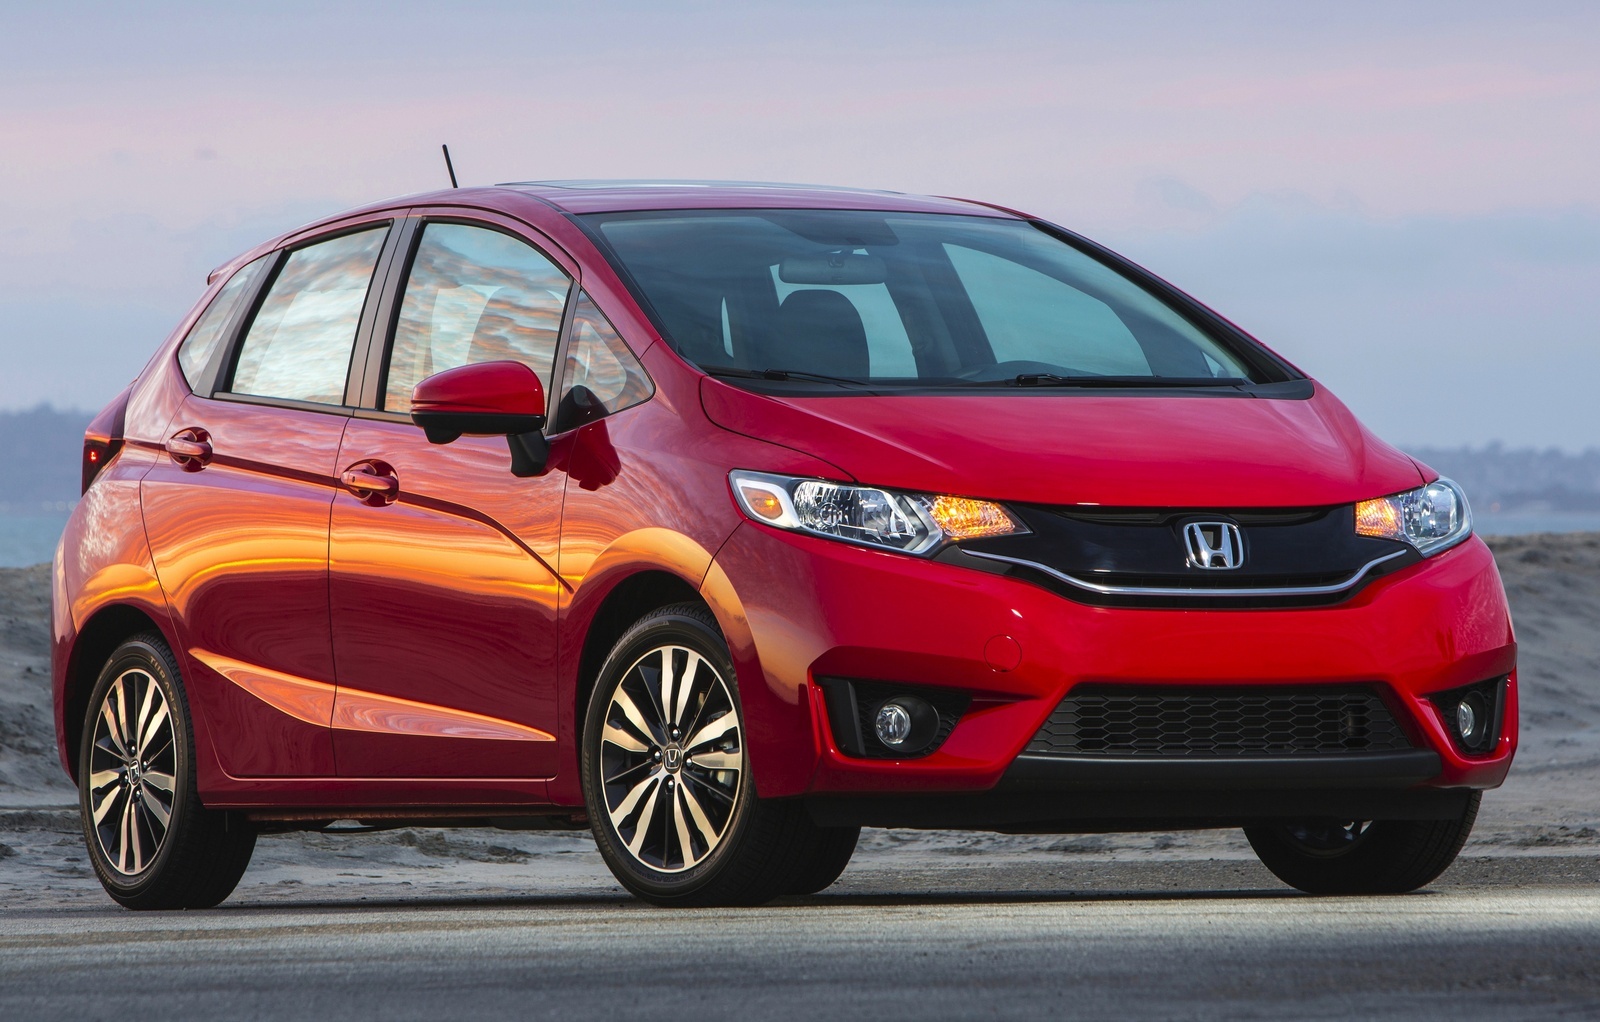 2015 Honda Fit Test Drive Review summaryImage